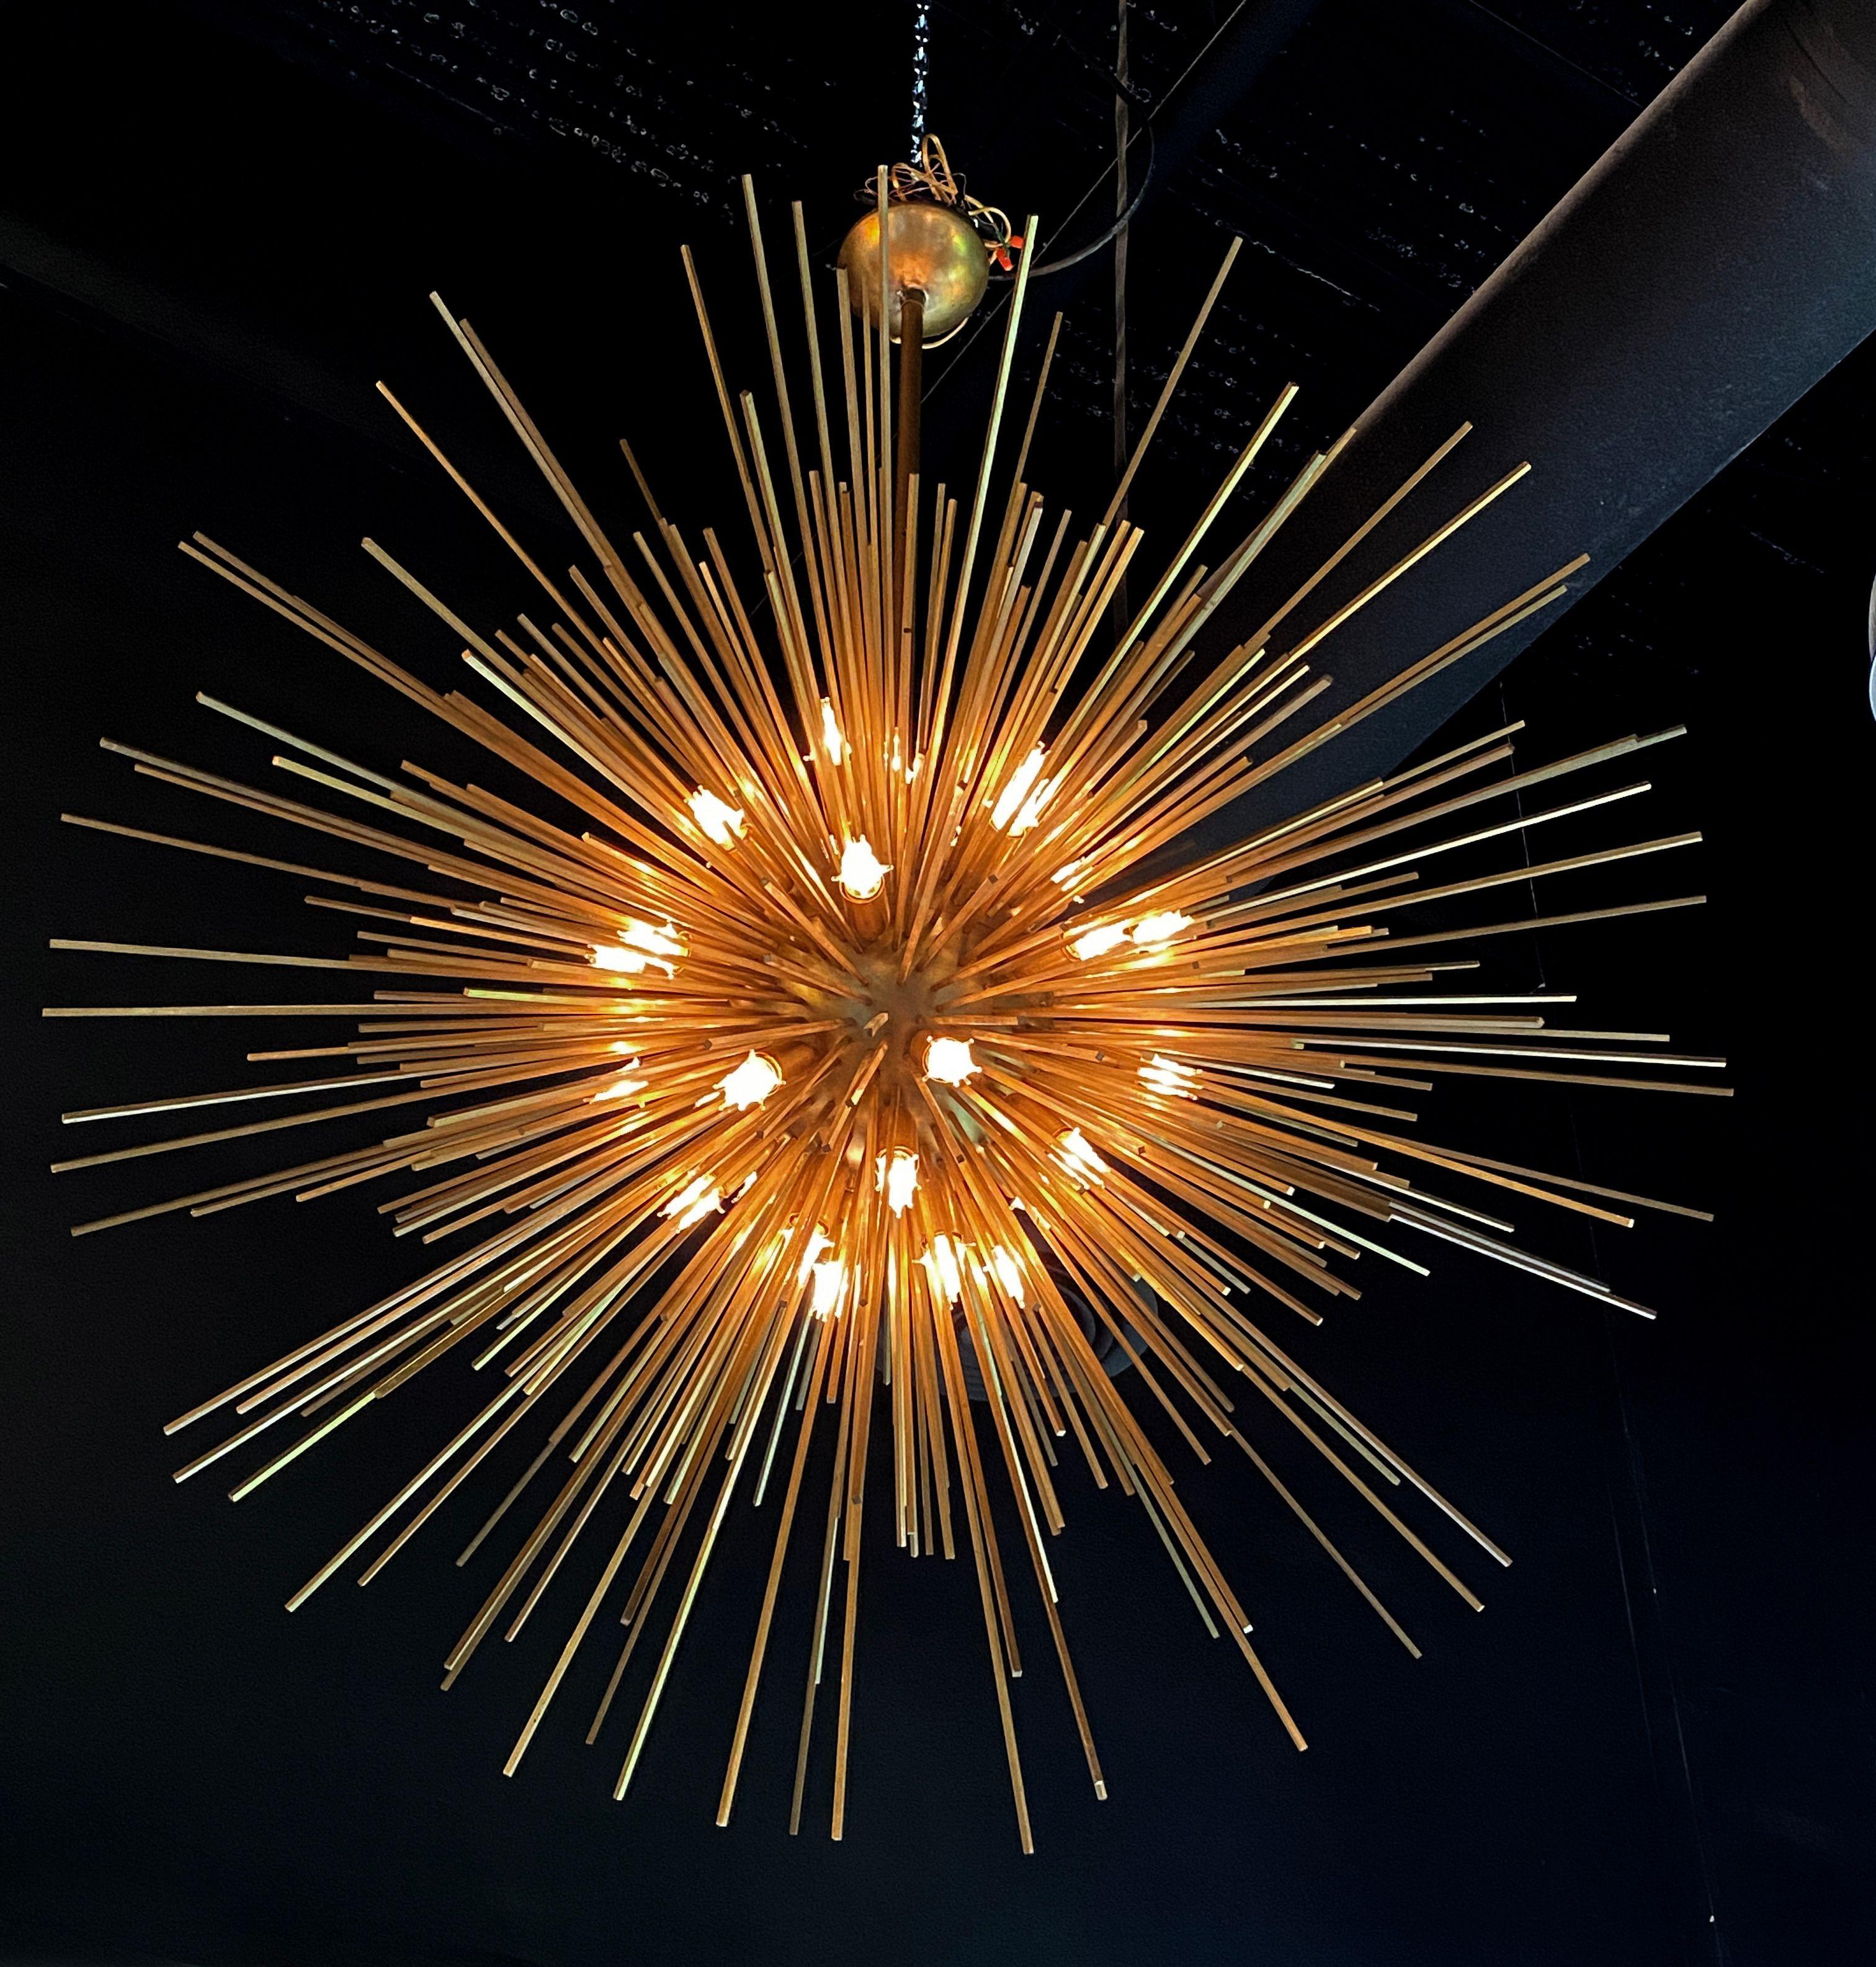 Pair of Italian Modern Monumental Sputnik chandeliers, timeless, modern, glamorous design, long bronze rods in varying sizes radiating from a spherical center with multiple lights around the sphere. 64